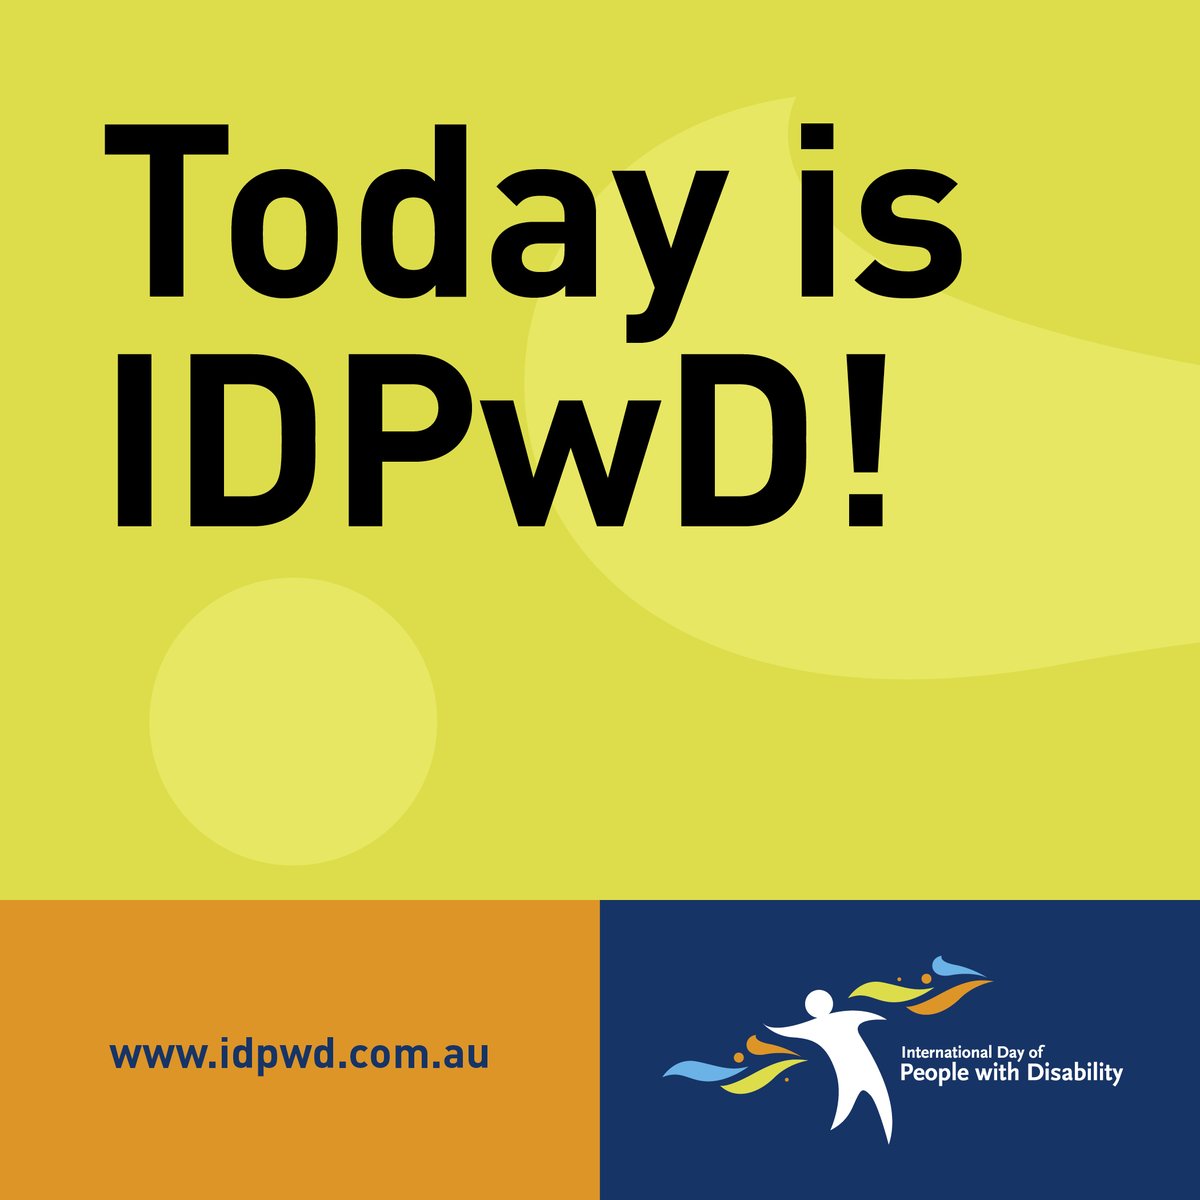 International Day of People with Disability is held on 3 December each year. It is a day to raise community awareness, understanding, and acceptance of the 4.4 million people with disability in Australia. Be part of creating an inclusive and diverse community #IDPwD #IDPwD2023